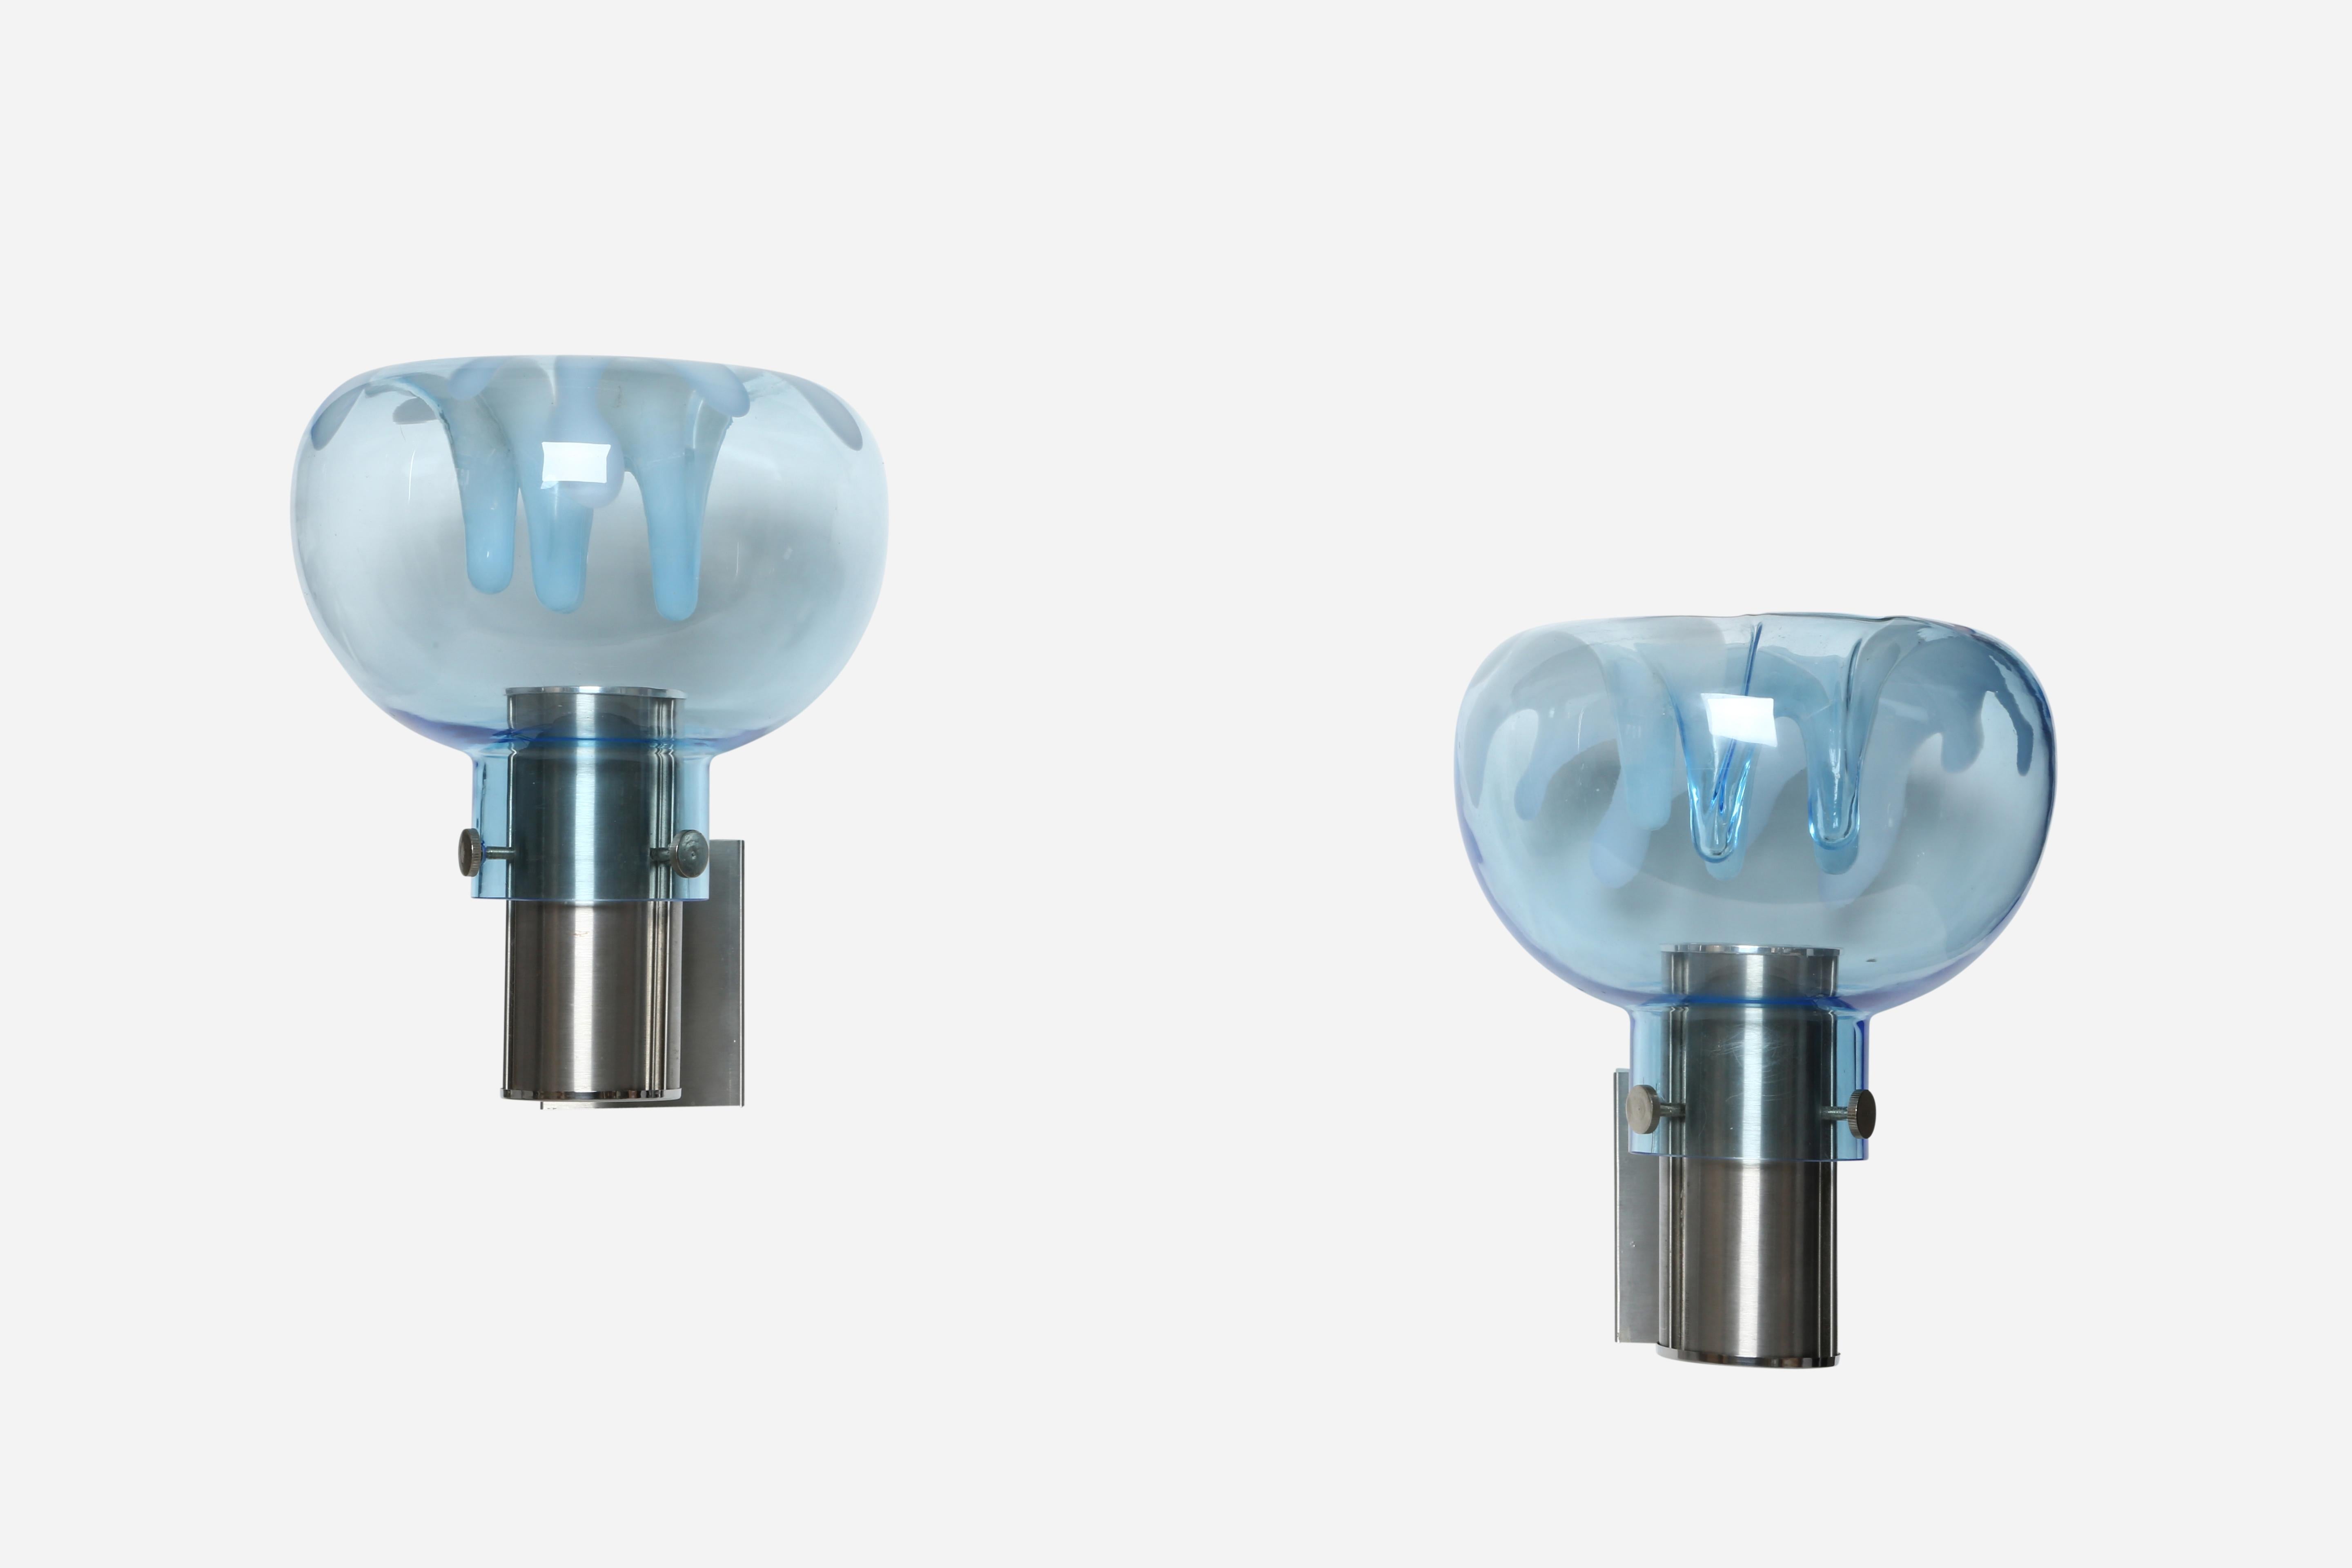 Murano glass sconces by Toni Zuccheri for VeArt.
Designed and manufactured in 1970s.
Take one medium base bulb each.
Complimentary US rewiring upon request.

We take pride in bringing vintage fixtures to their full glory again.
At Illustris Lighting